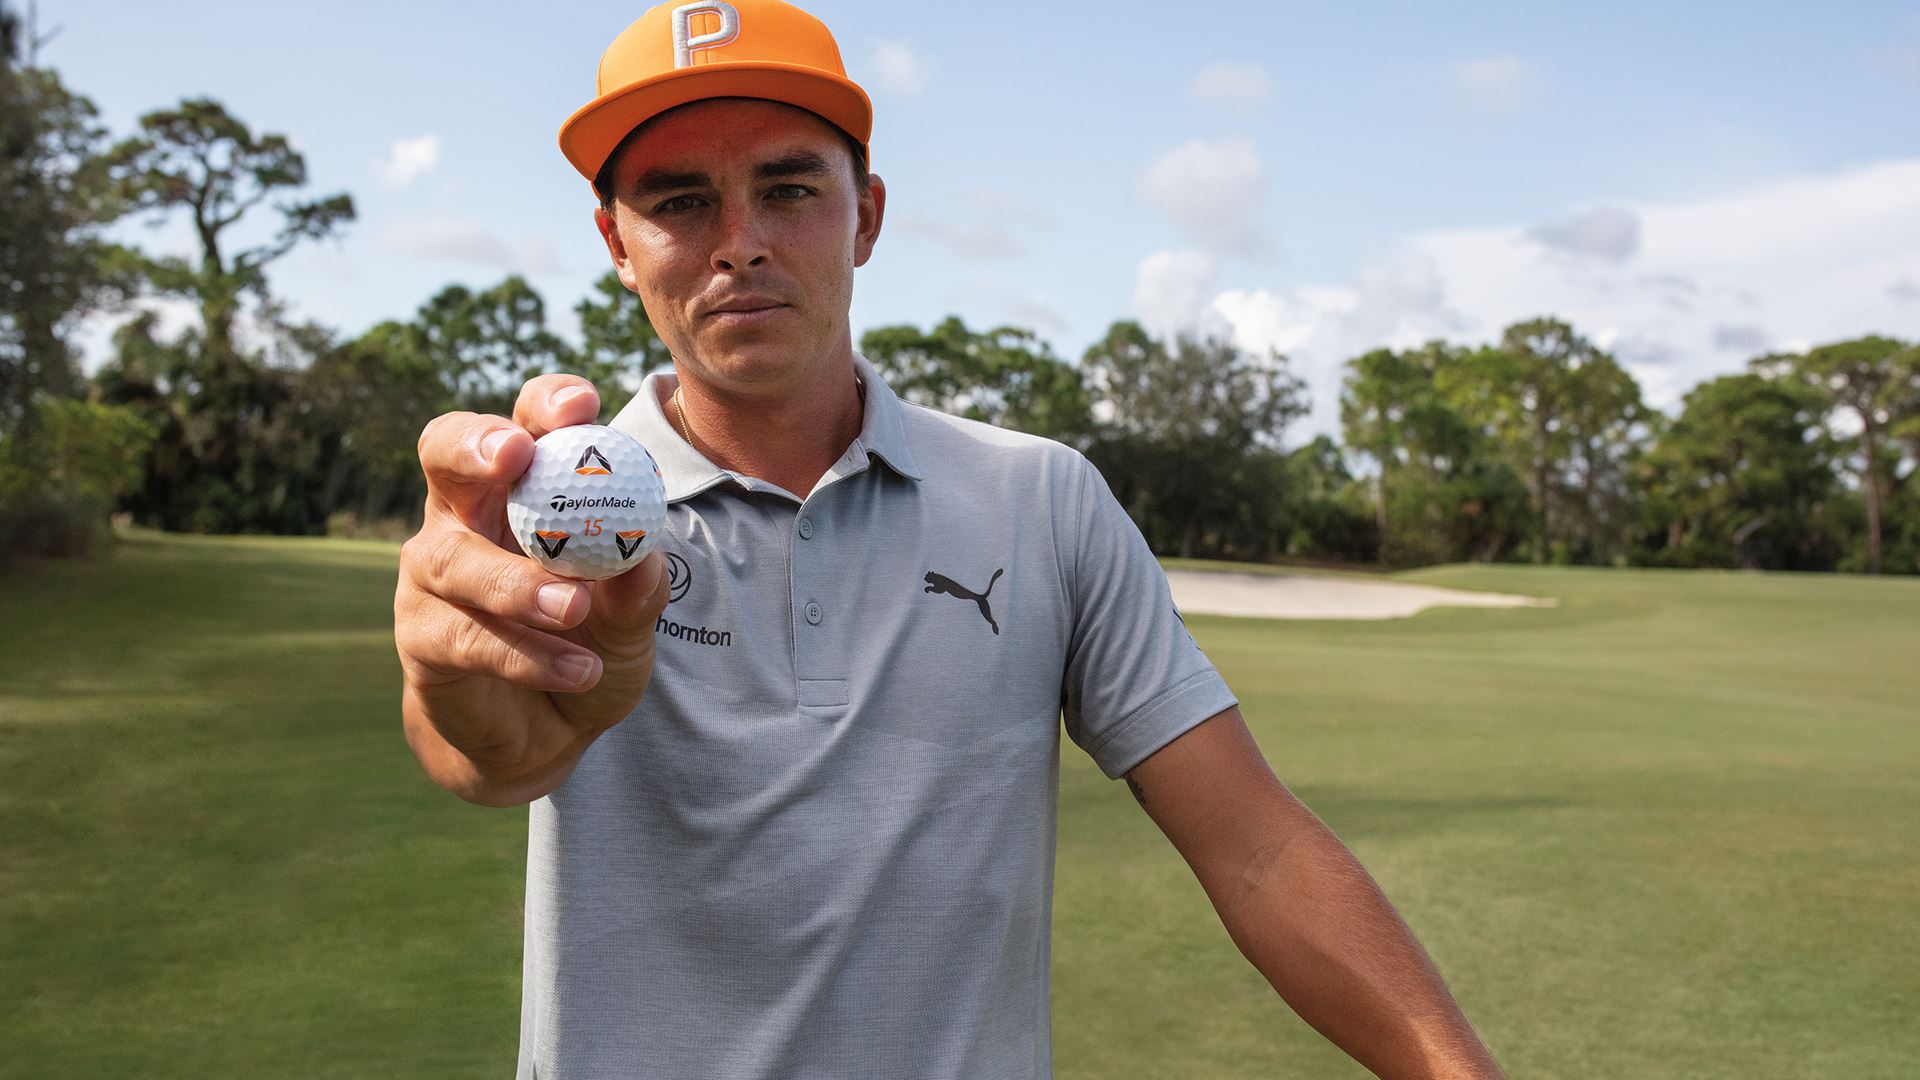 TaylorMade Golf Company Announces The All-New TP5/TP5 pix, Co-Developed and Played By Rickie Fowler